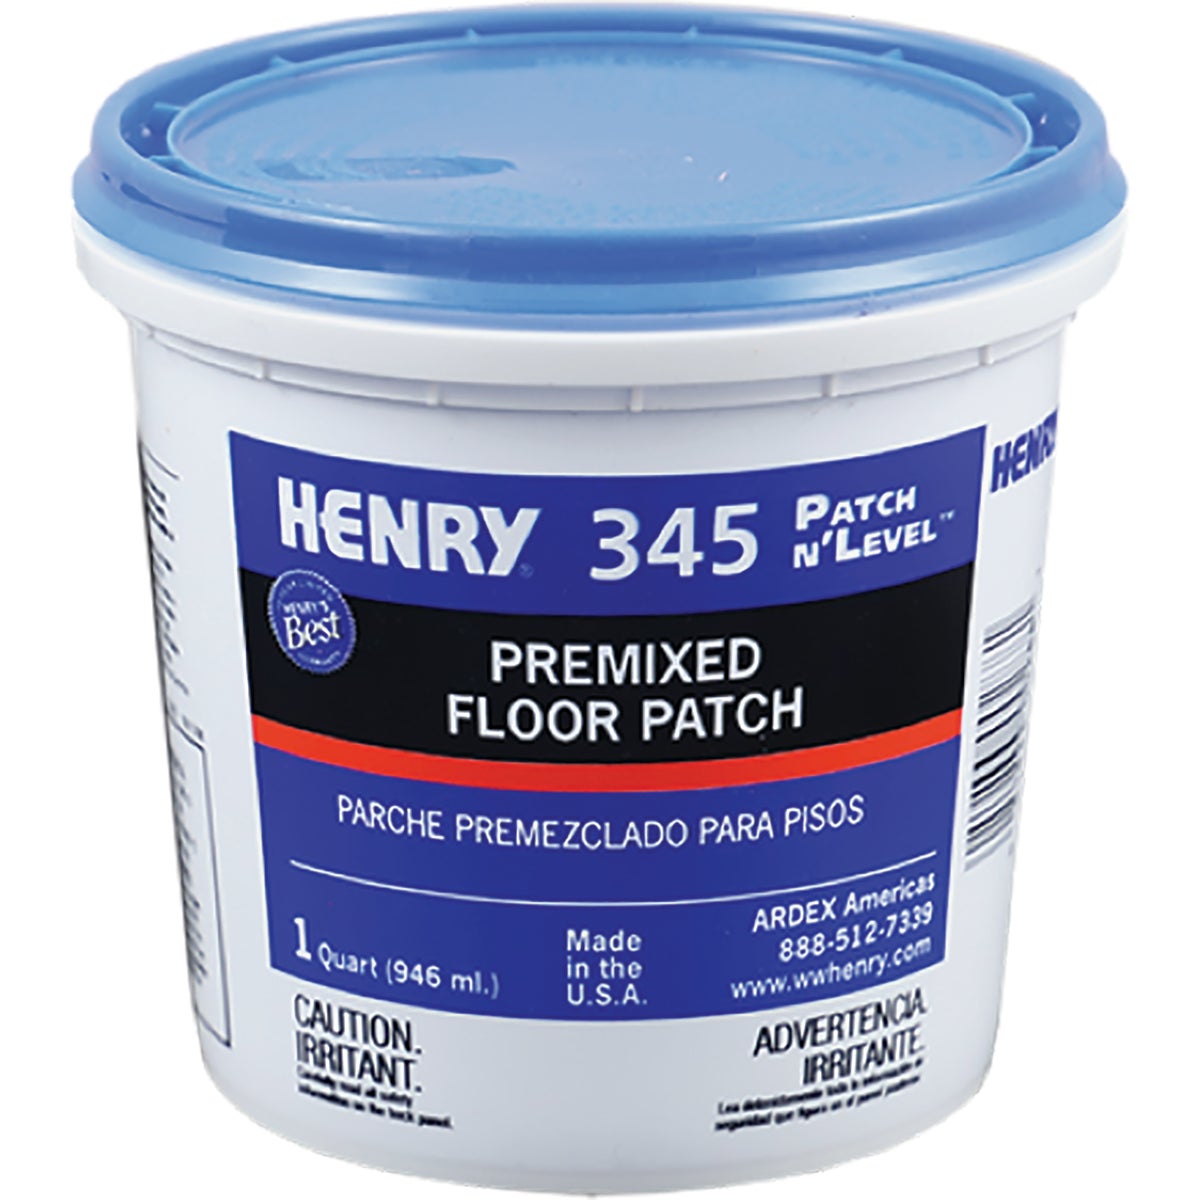 Item 263360, Ready-to-use flooring patch for smoothing and repairing interior and 